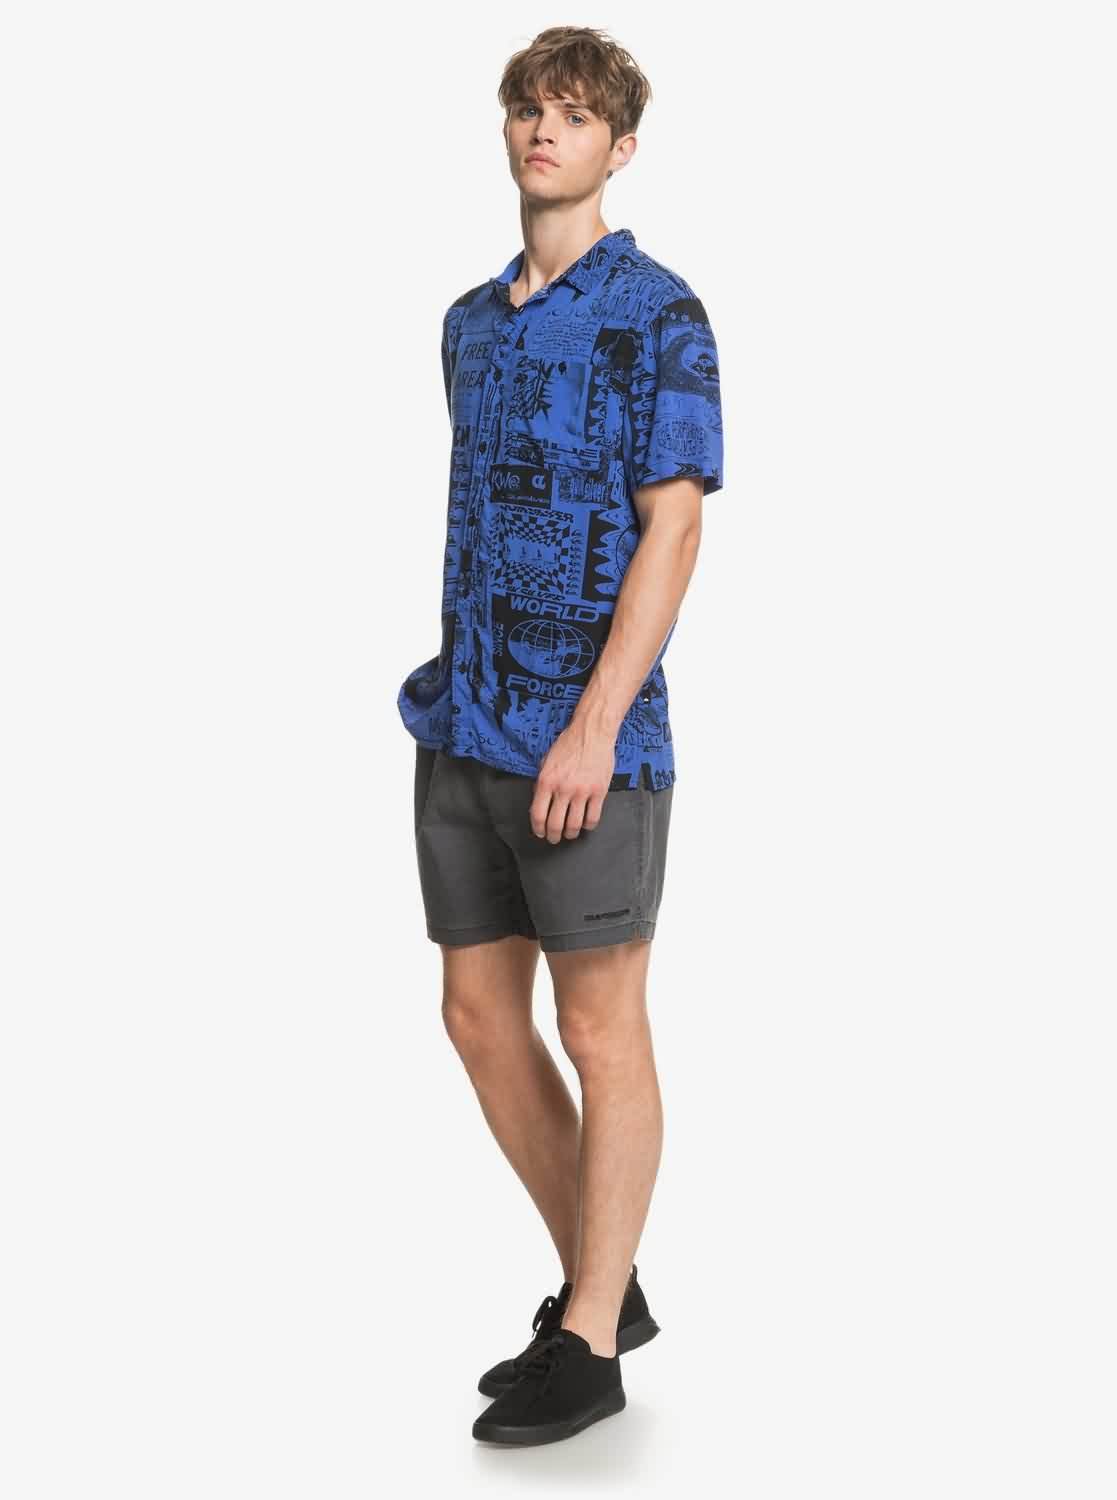 Quiksilver Mens 2020 | The Rave Wave Surf Apparel Collection